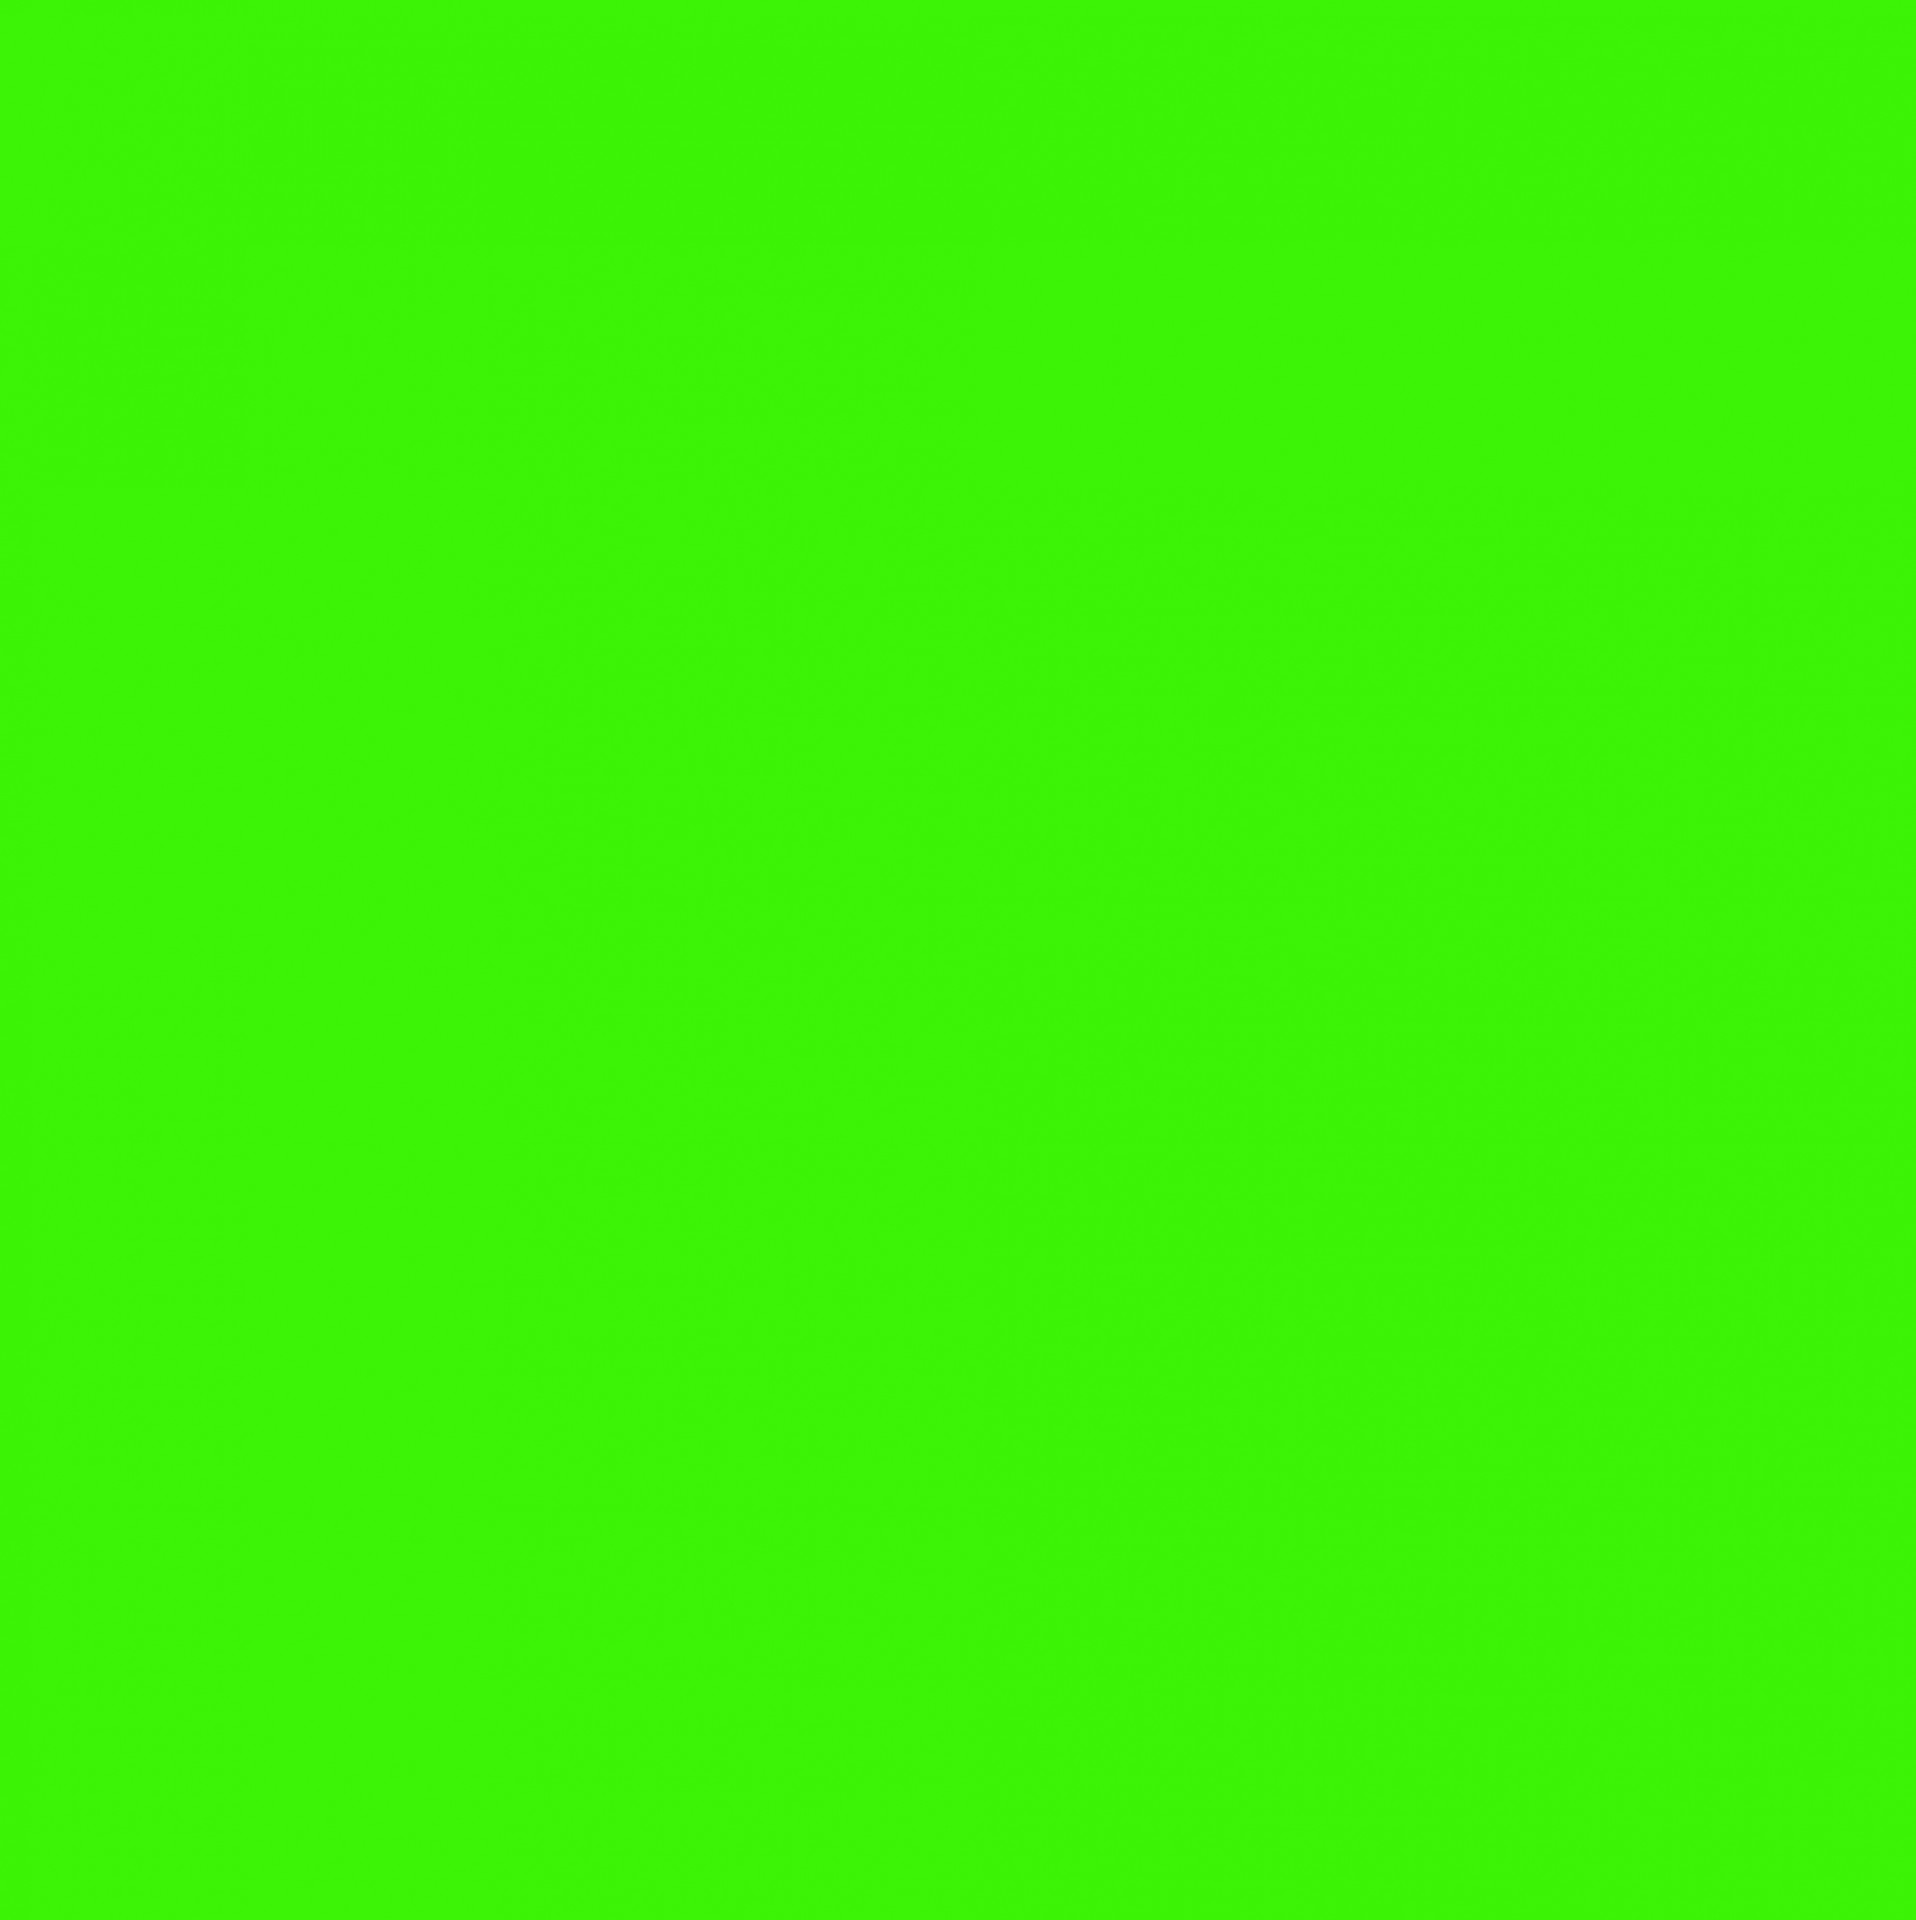 green bright green background free photo